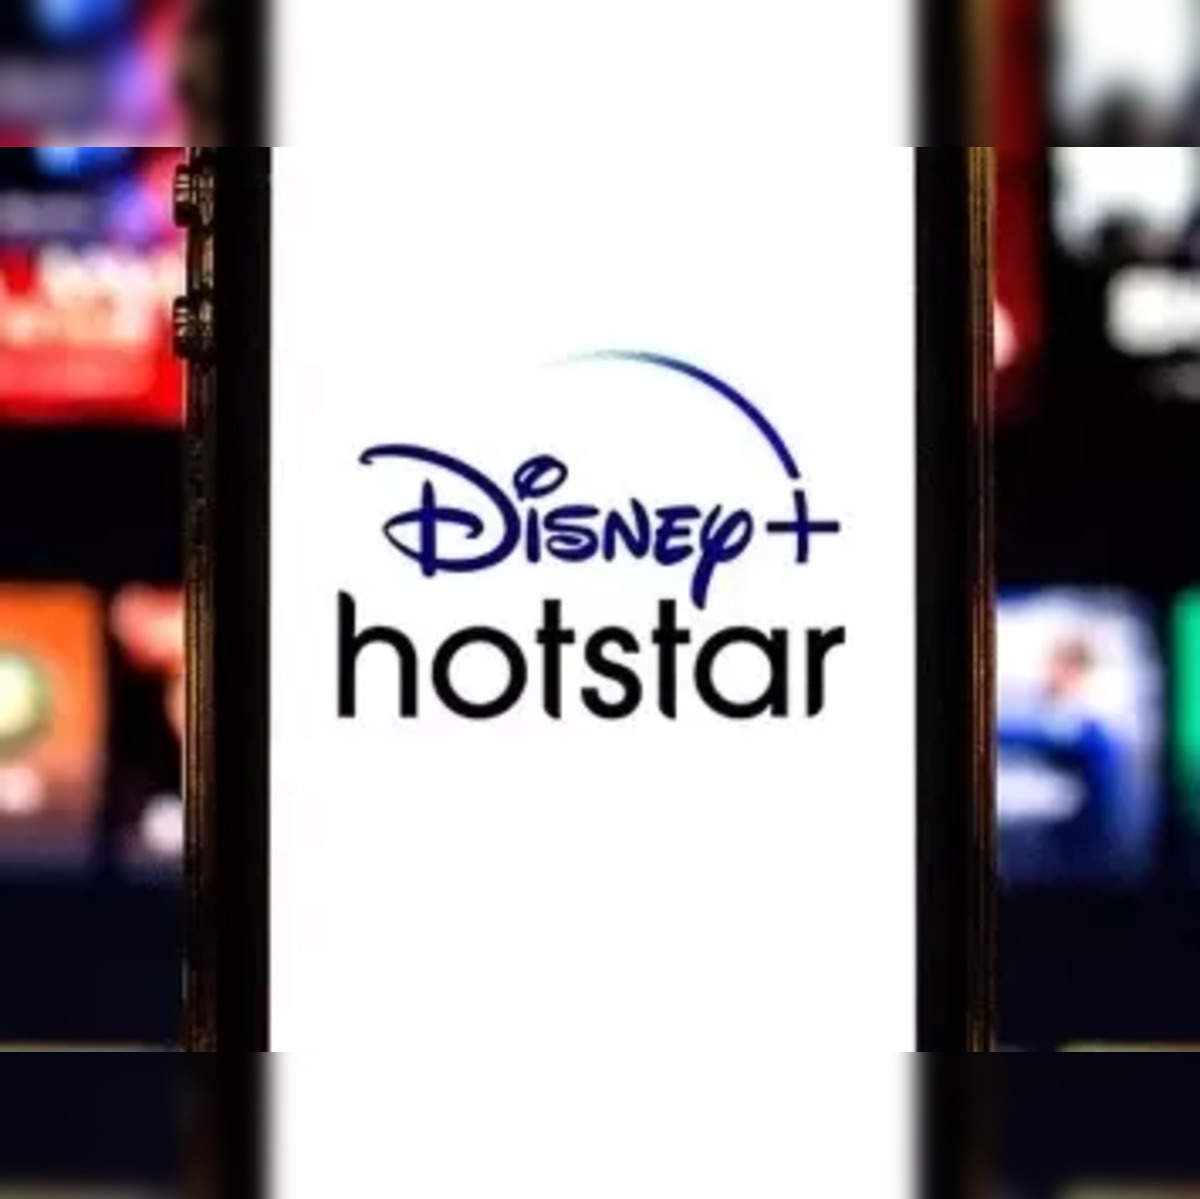 Disney+Hotstar Is Live in India Know Everything | TechyCoder